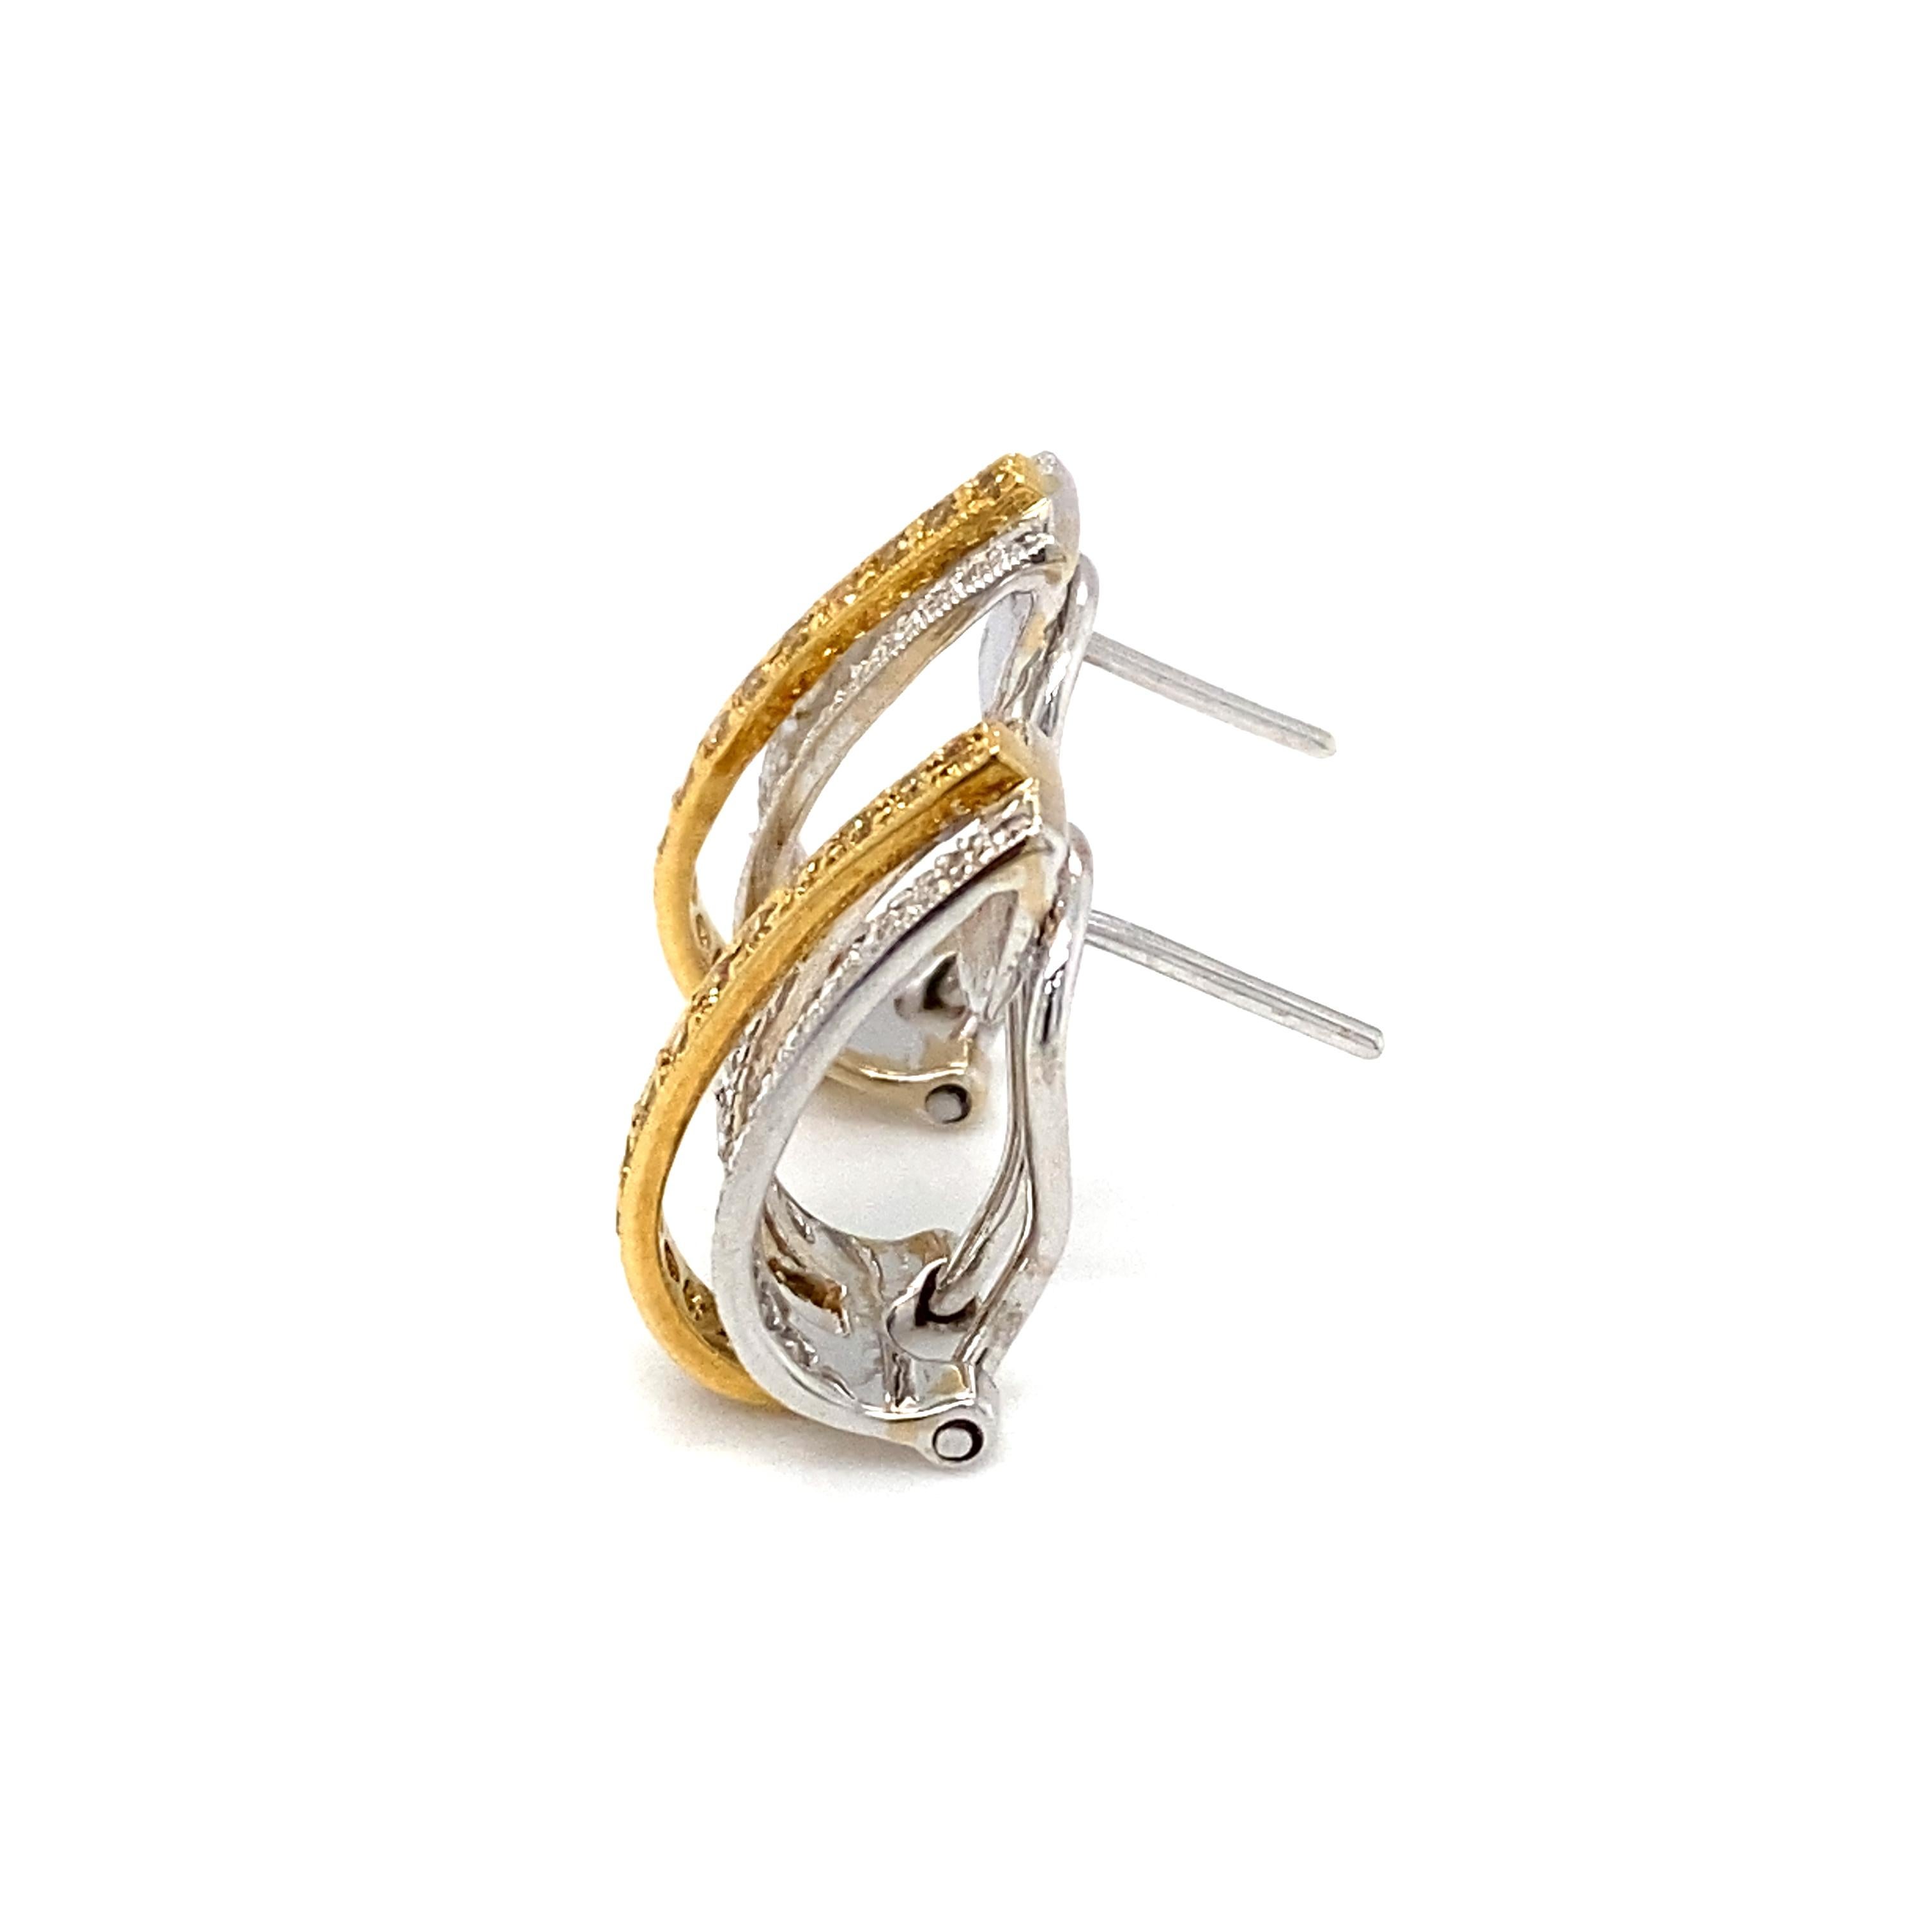 Women's or Men's Circa 2010s 2.0 Carat Yellow and White Diamond Earrings in 18 Karat Gold  For Sale